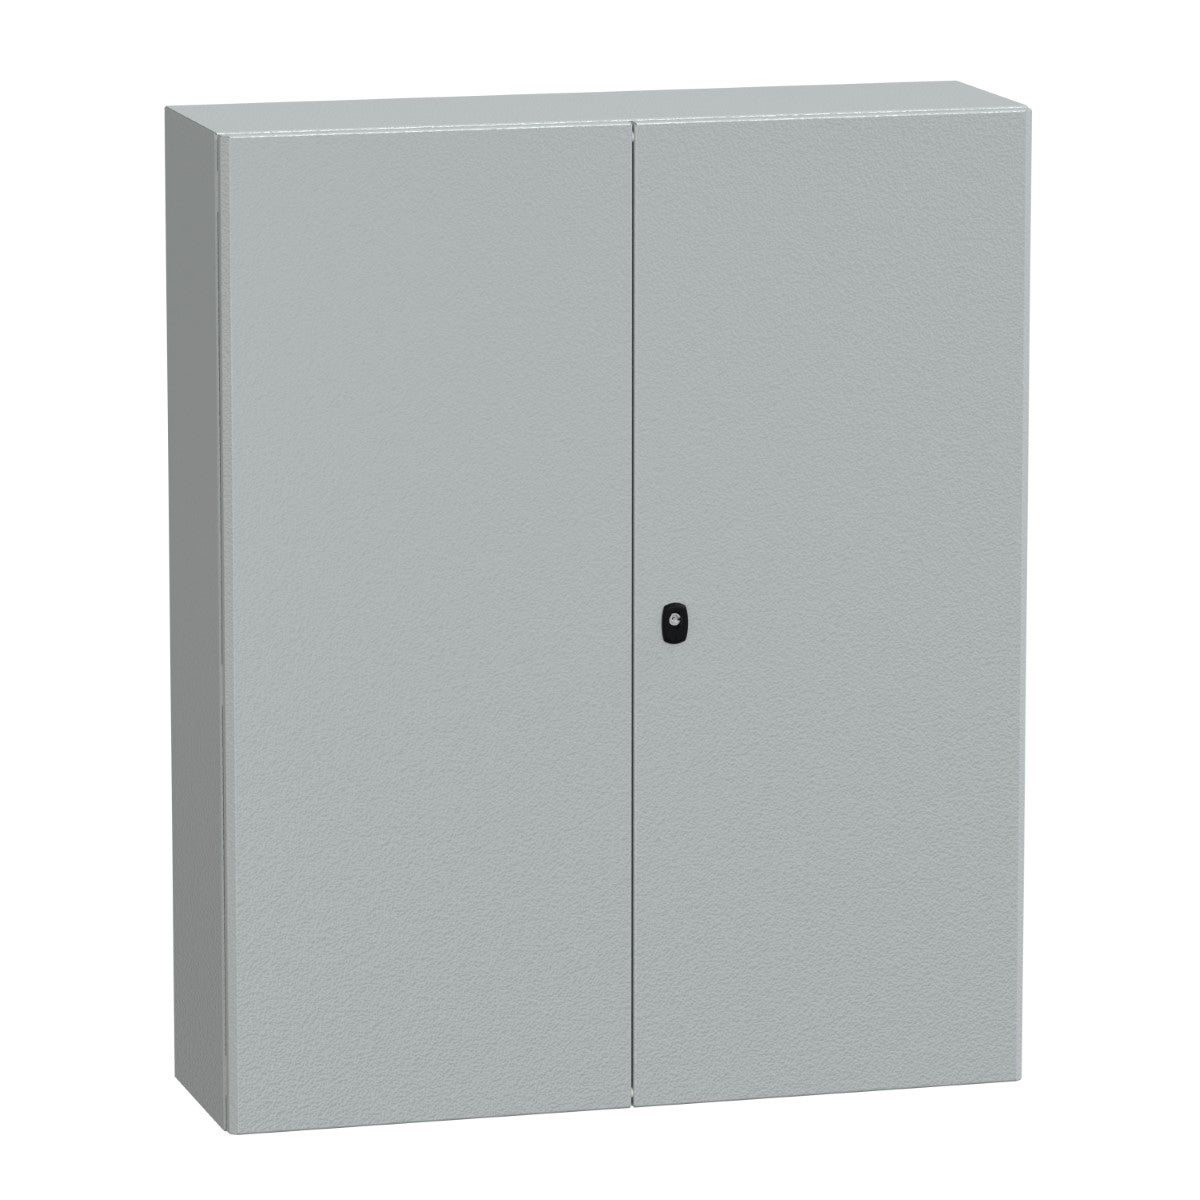 Wall mounted steel enclosure, Spacial S3D, double plain door, without mounting plate, 1200x1000x300mm, IP55, IK10